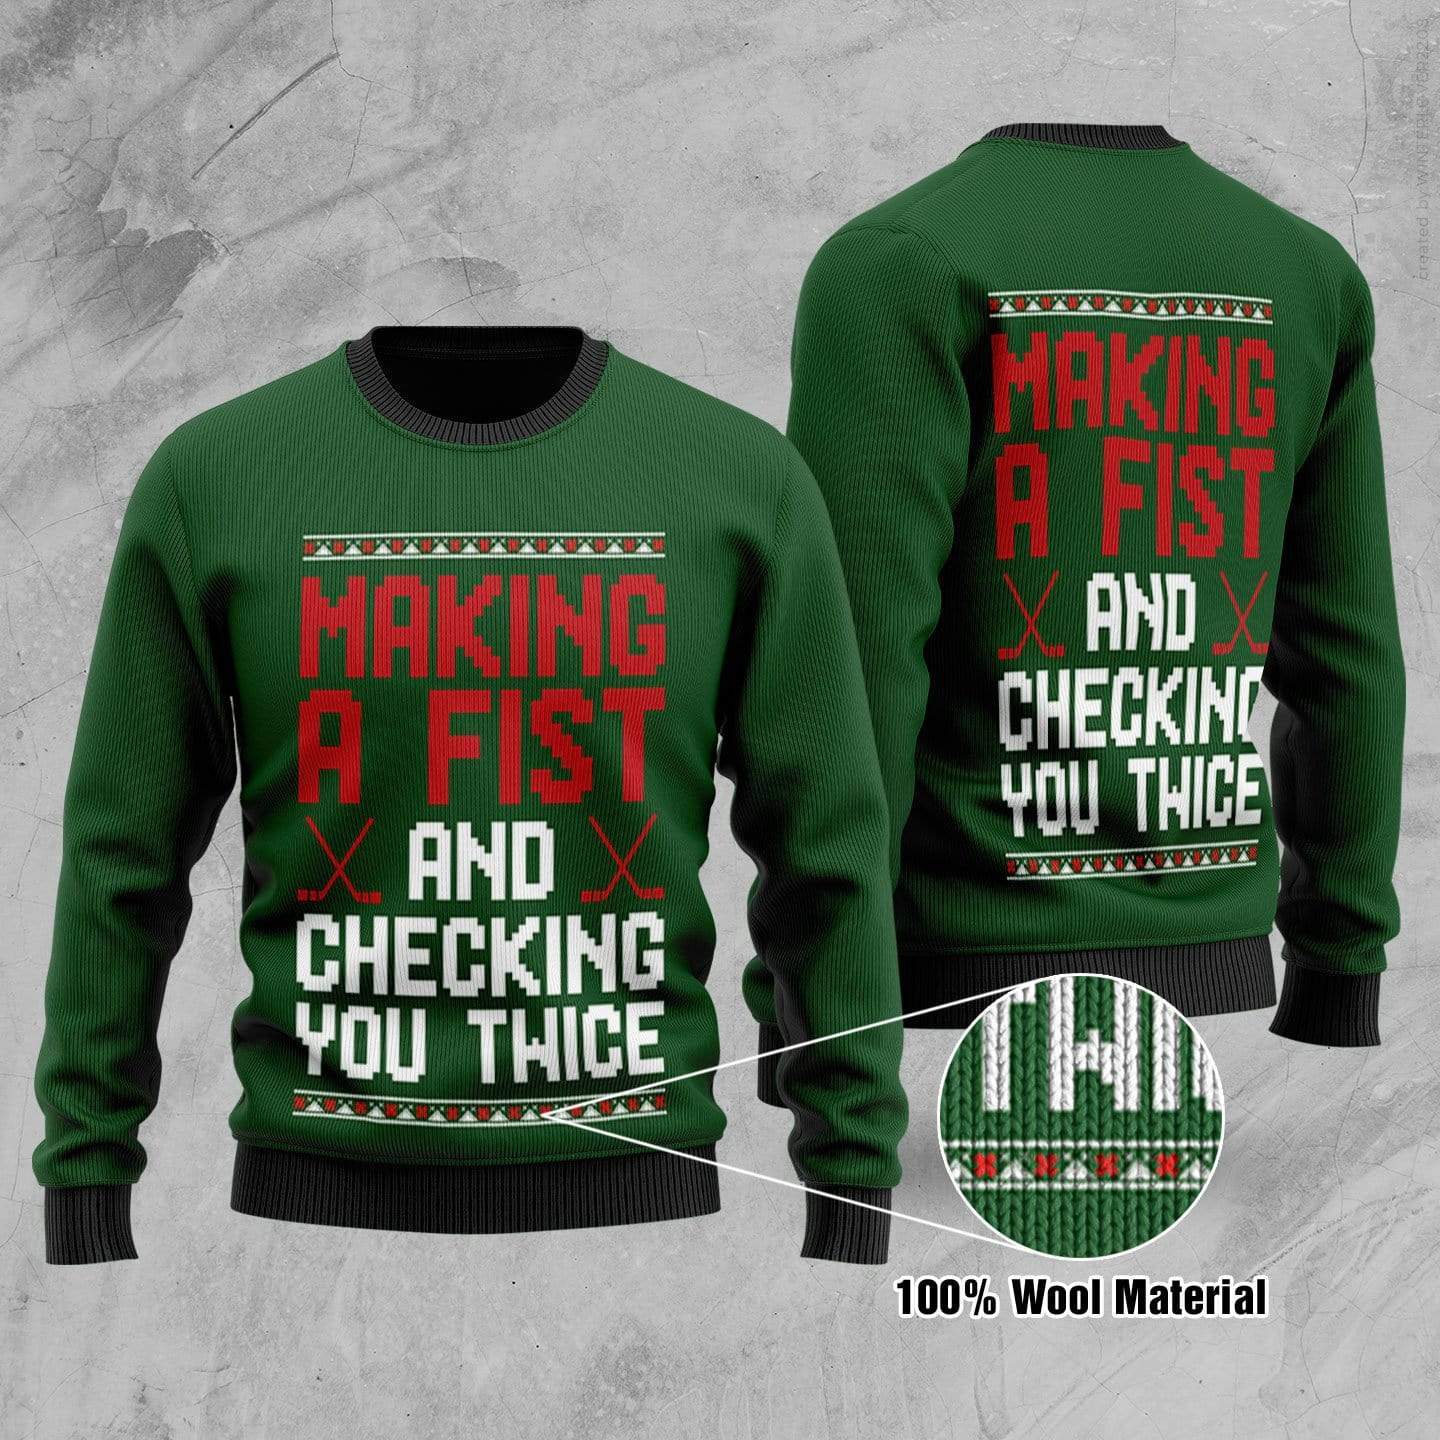 Hockey Making A Fist And Checking Your Twice Sweater 710L